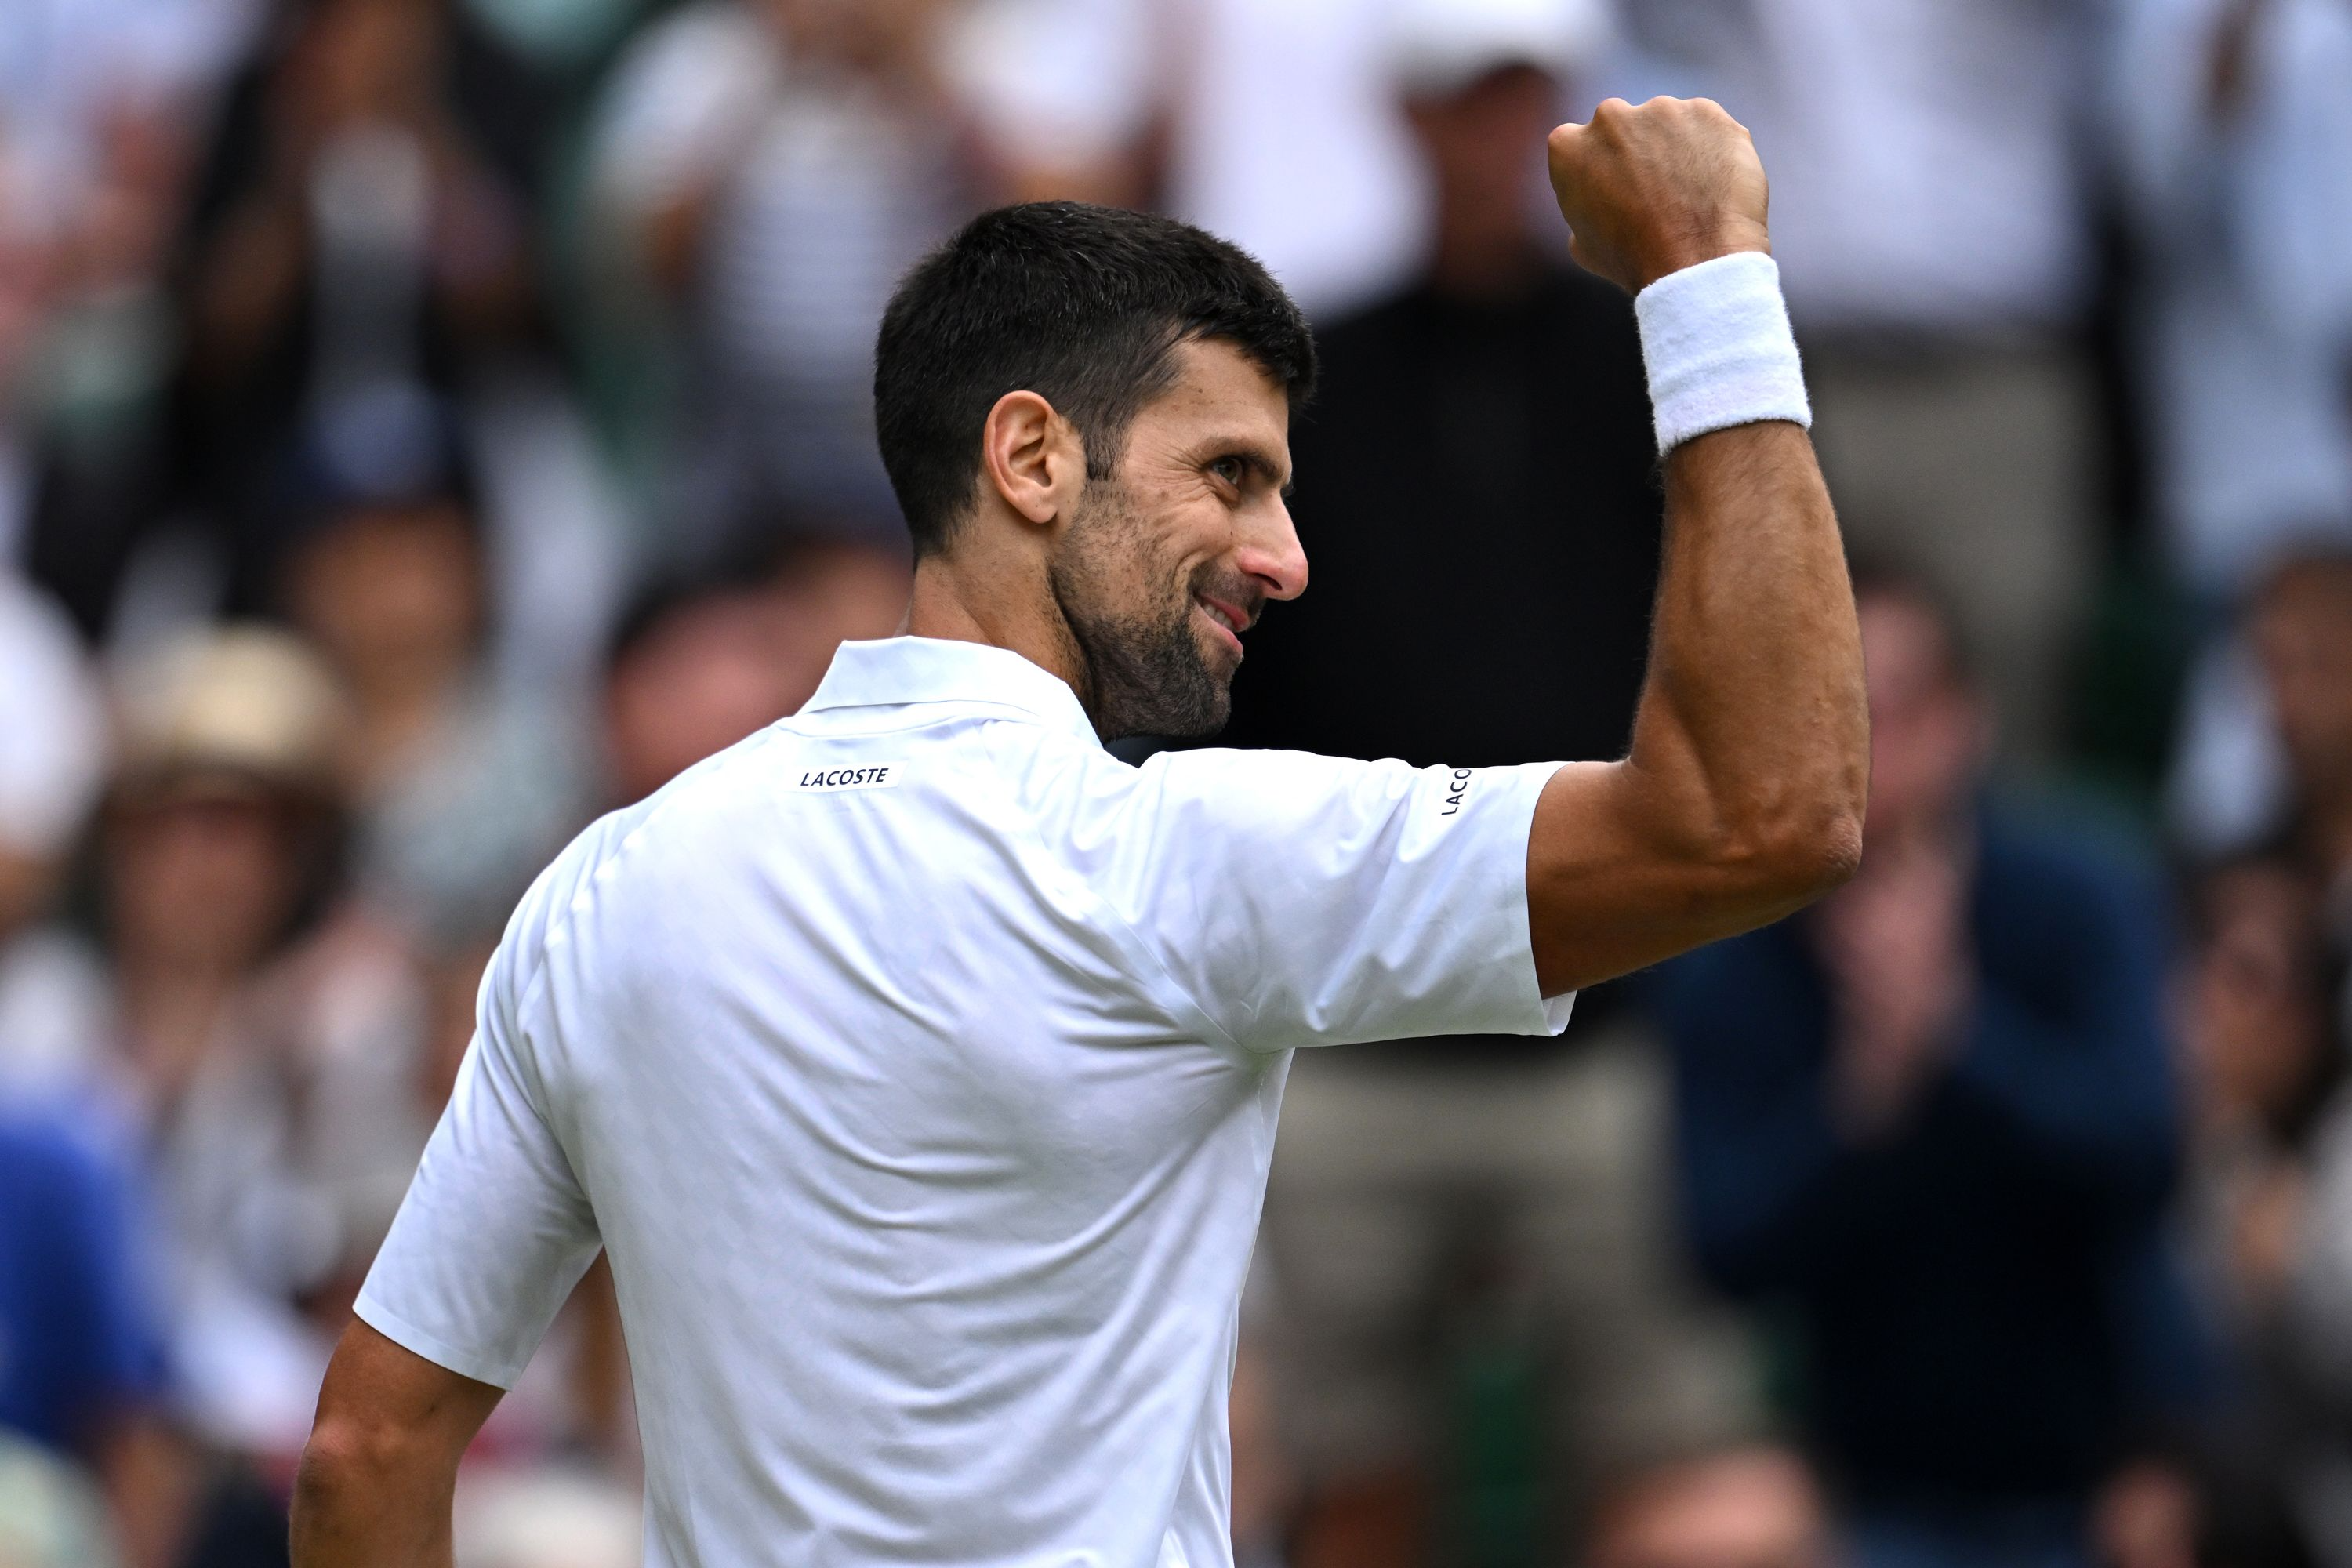 Djokovic Defeats Sinner to Become Wimbledon Finalist for the Ninth Time